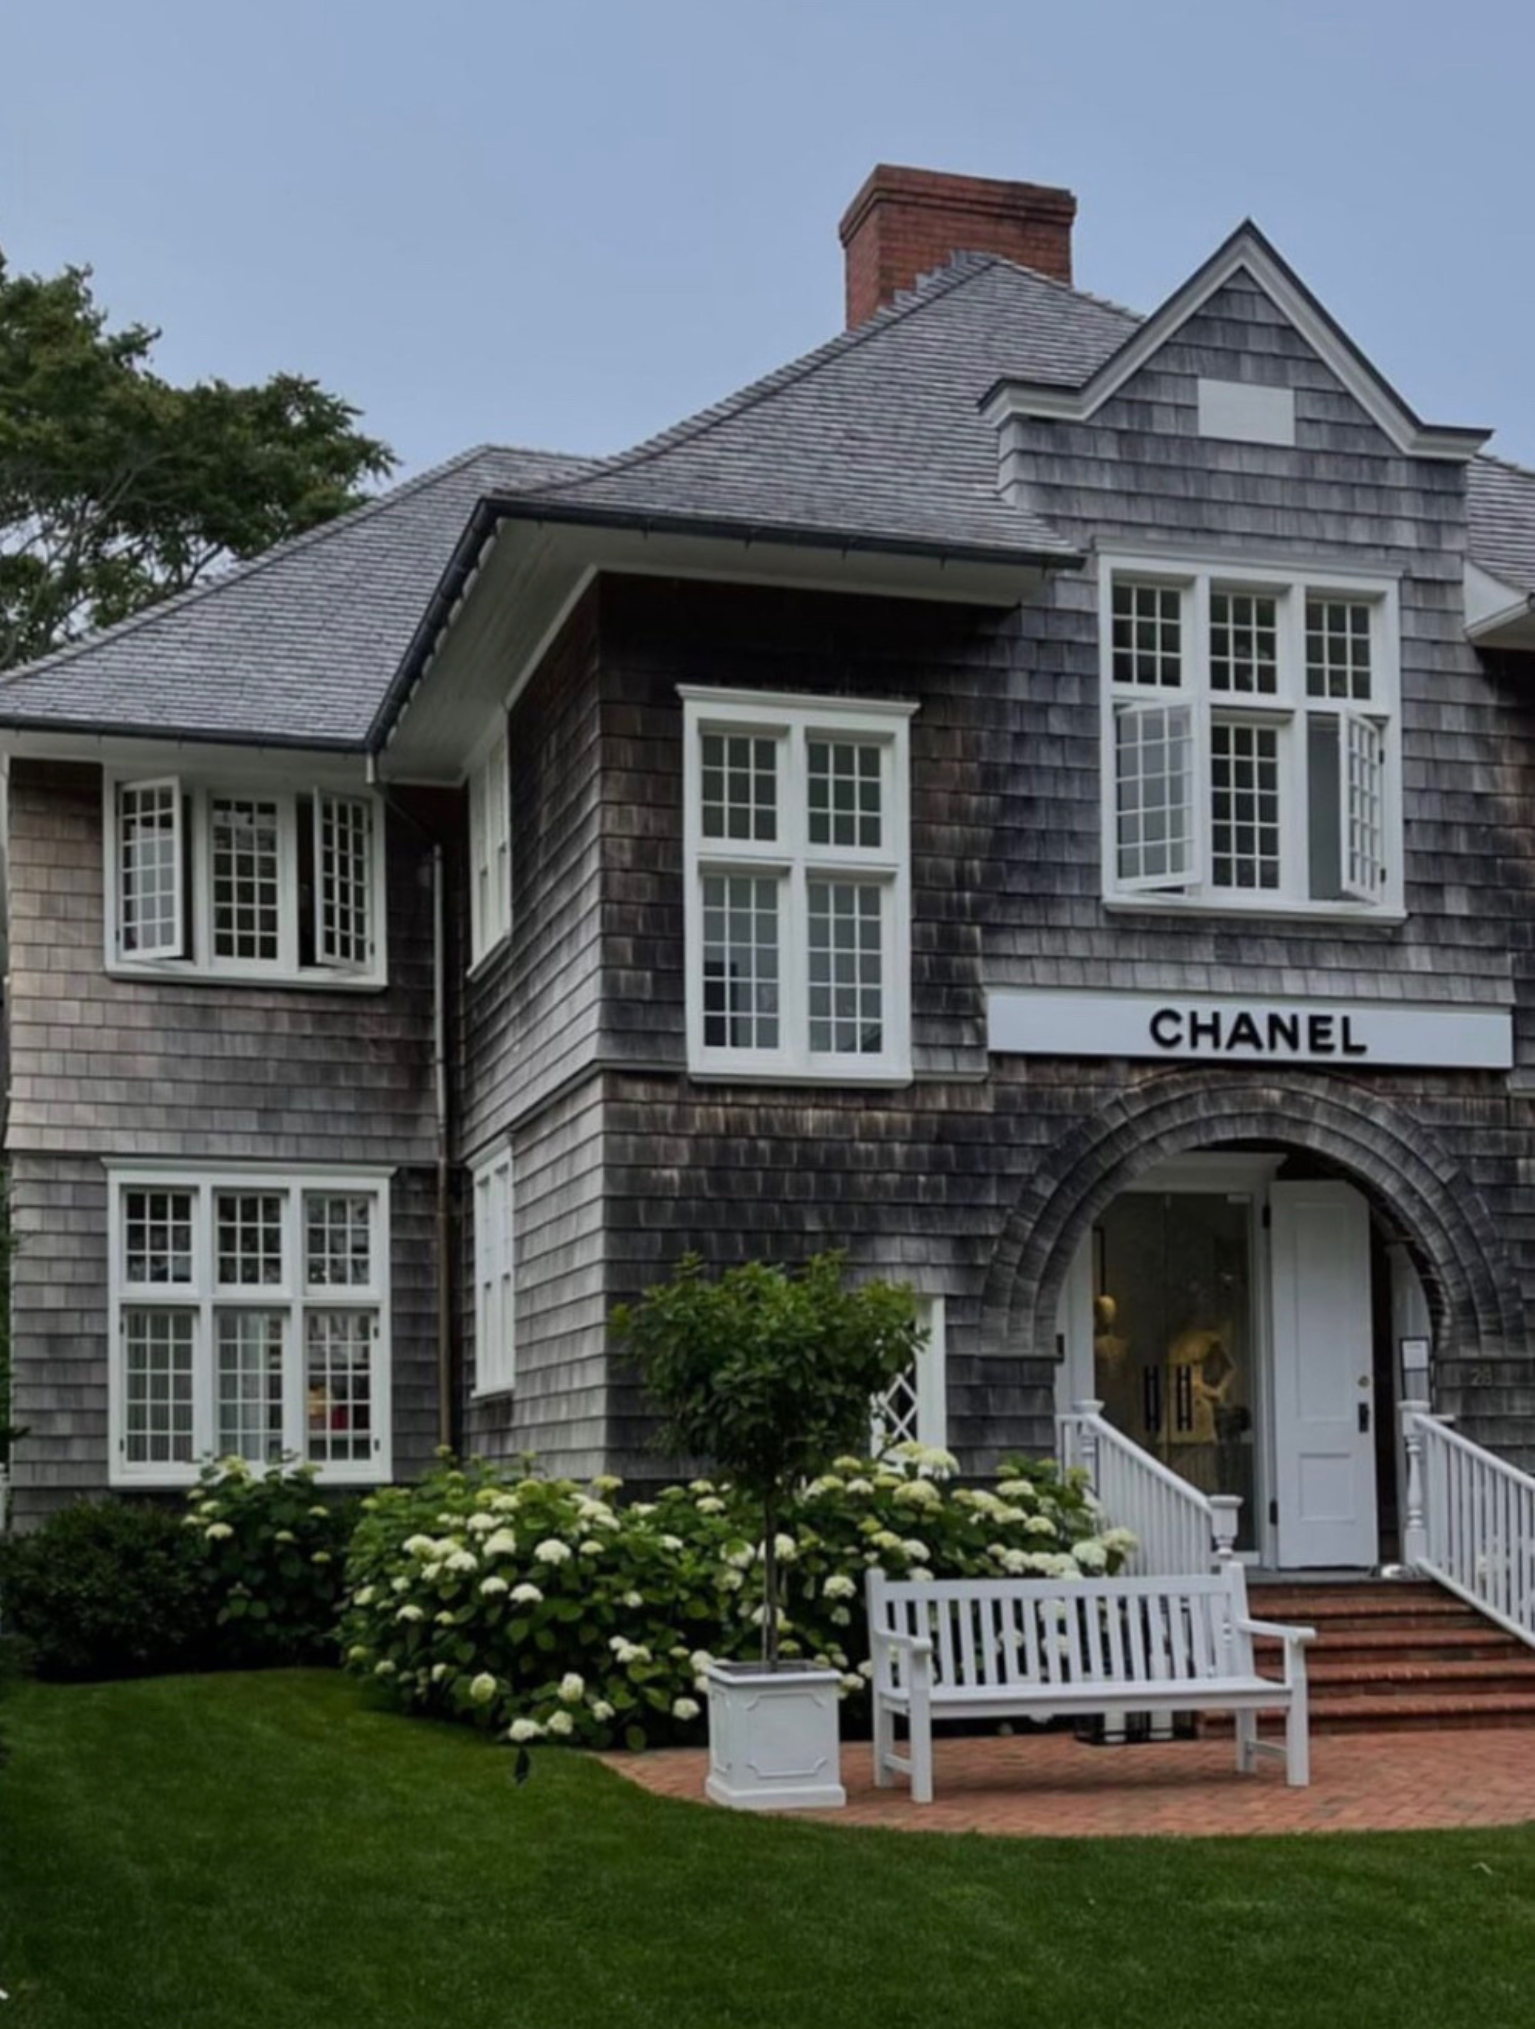 Louis Vuitton unveiled its new store in East Hampton this weekend